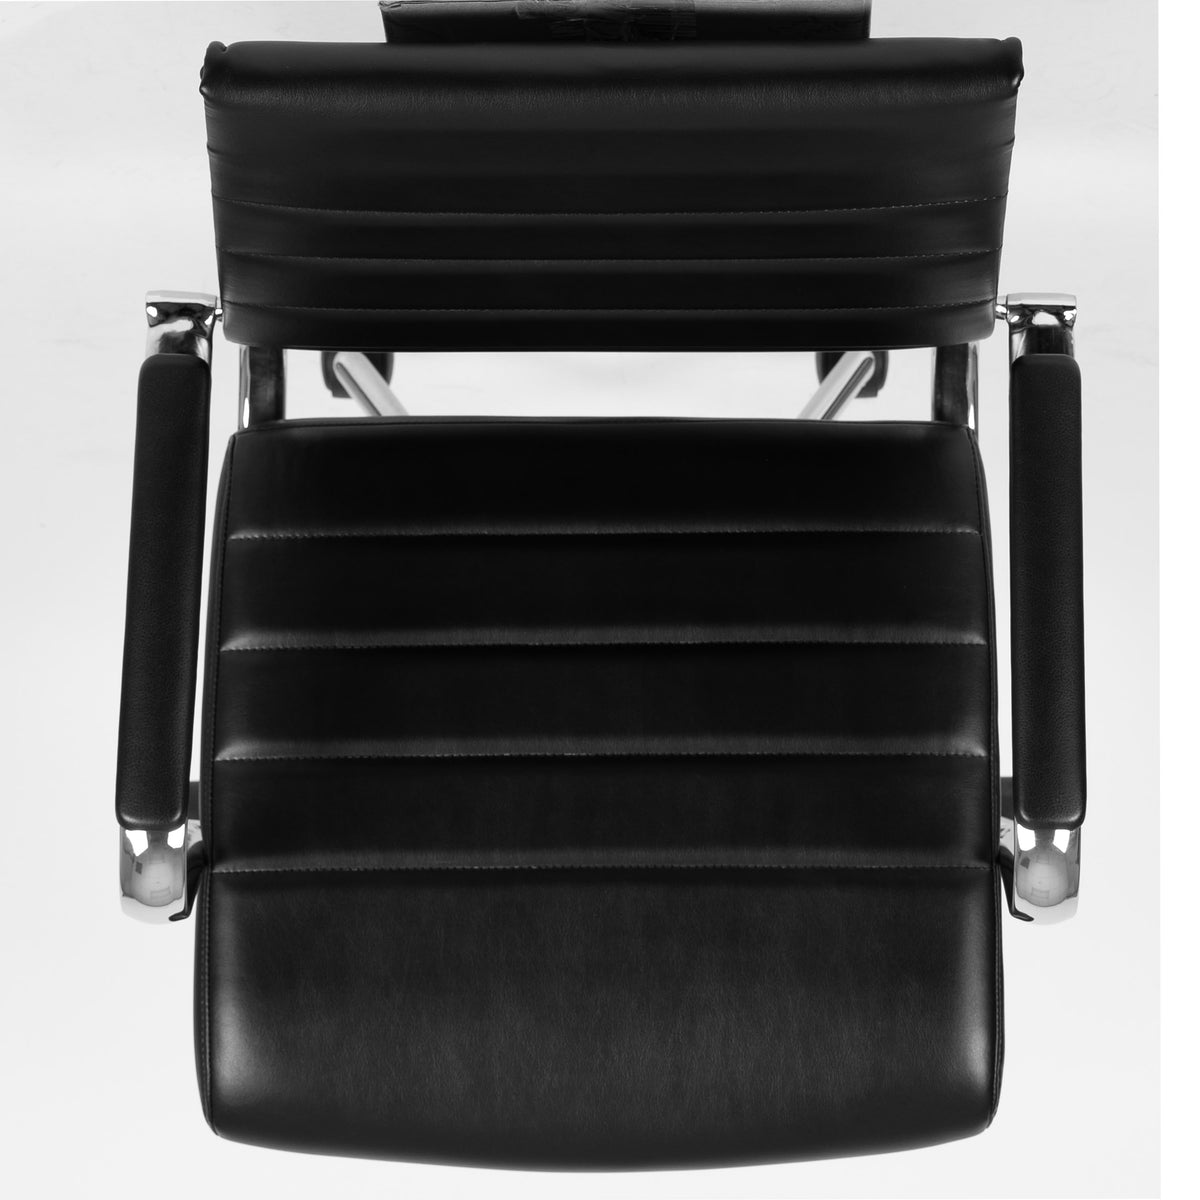 Black |#| Mid-Back Black LeatherSoft Ribbed Executive Swivel Office Chair - Desk Chair